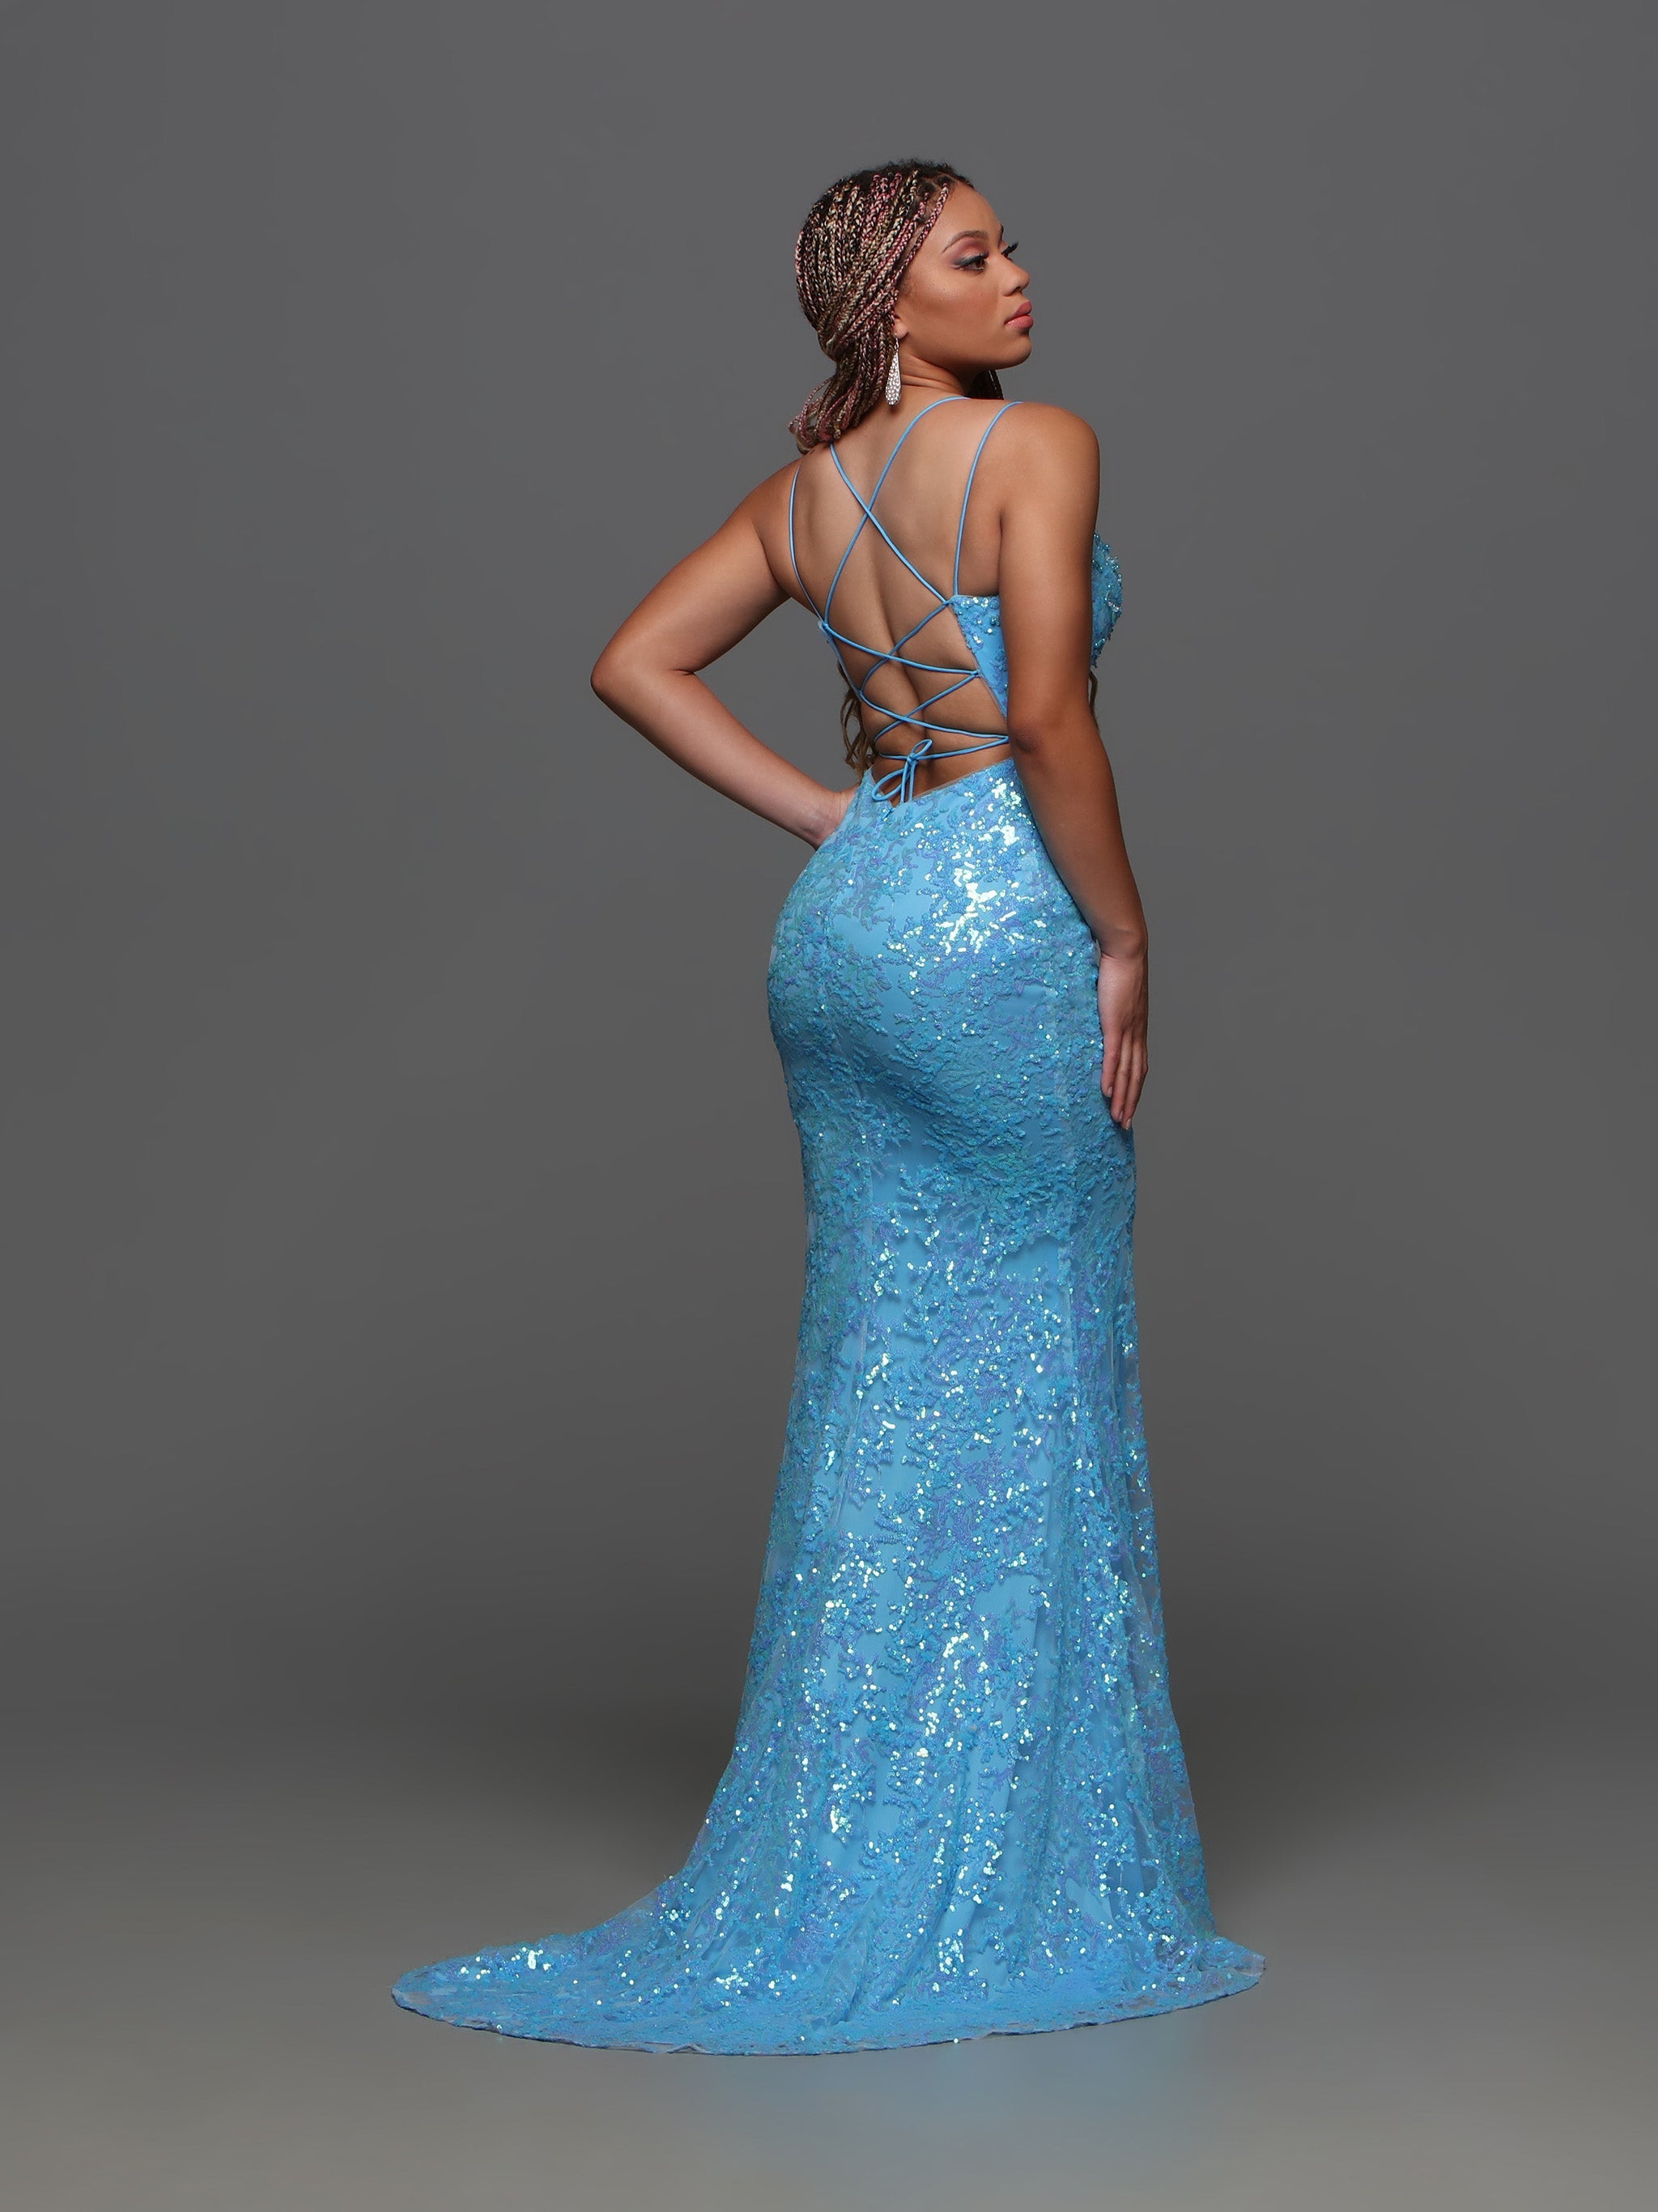 Extreme Prom Dresses|2023 Mermaid Prom Dress - Sparkly Sequin & Crystal  Embellished, Plus Size